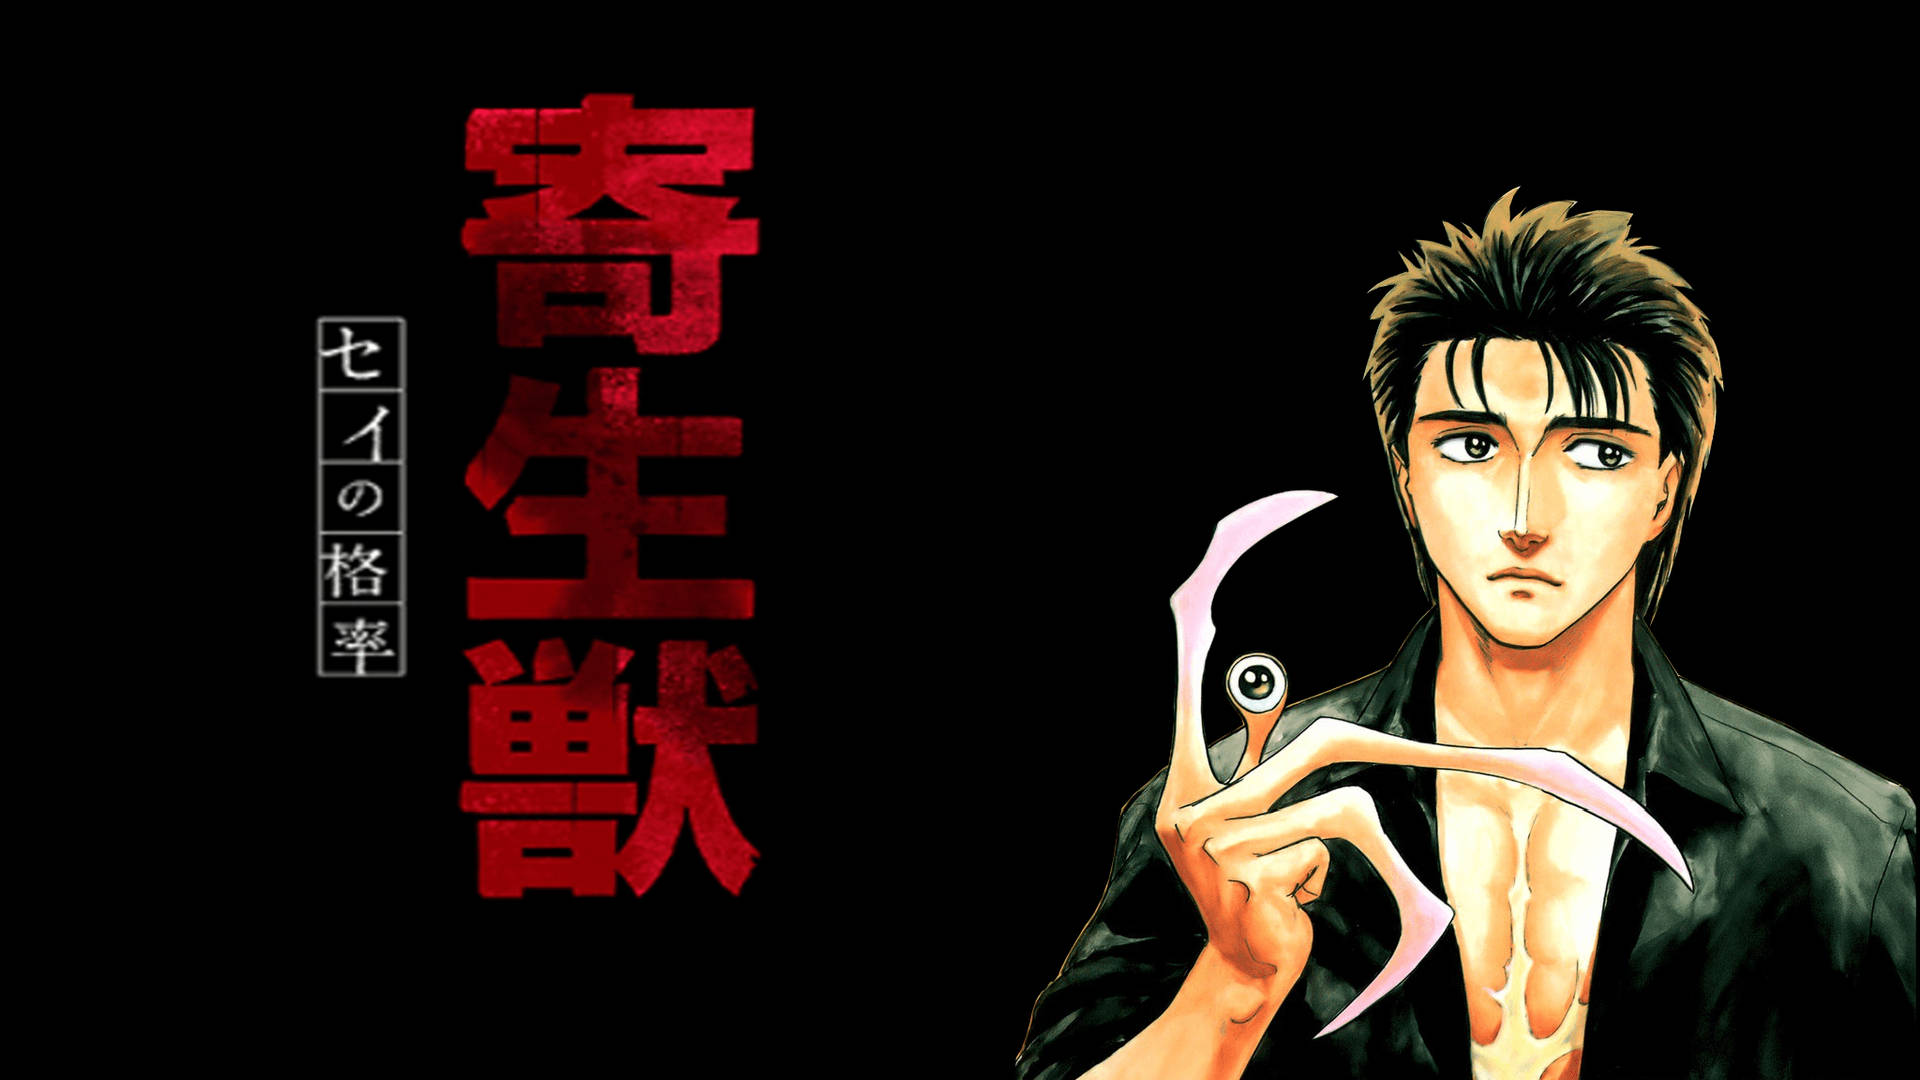 Download Anime Characters Parasyte: The Maxim Wallpaper 